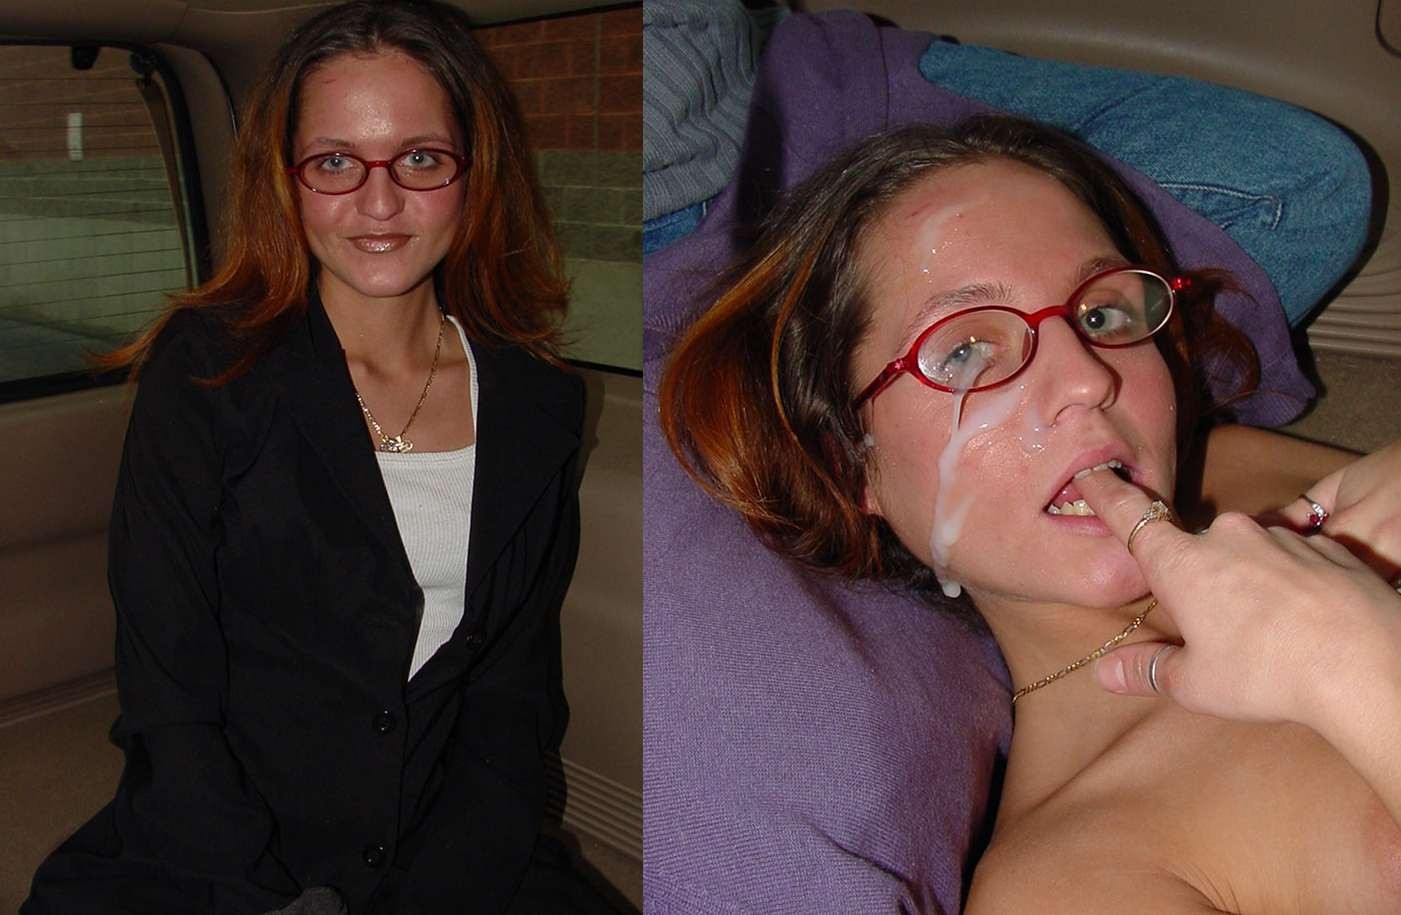 Wifebucket Before And After The Big Facial Cumshot